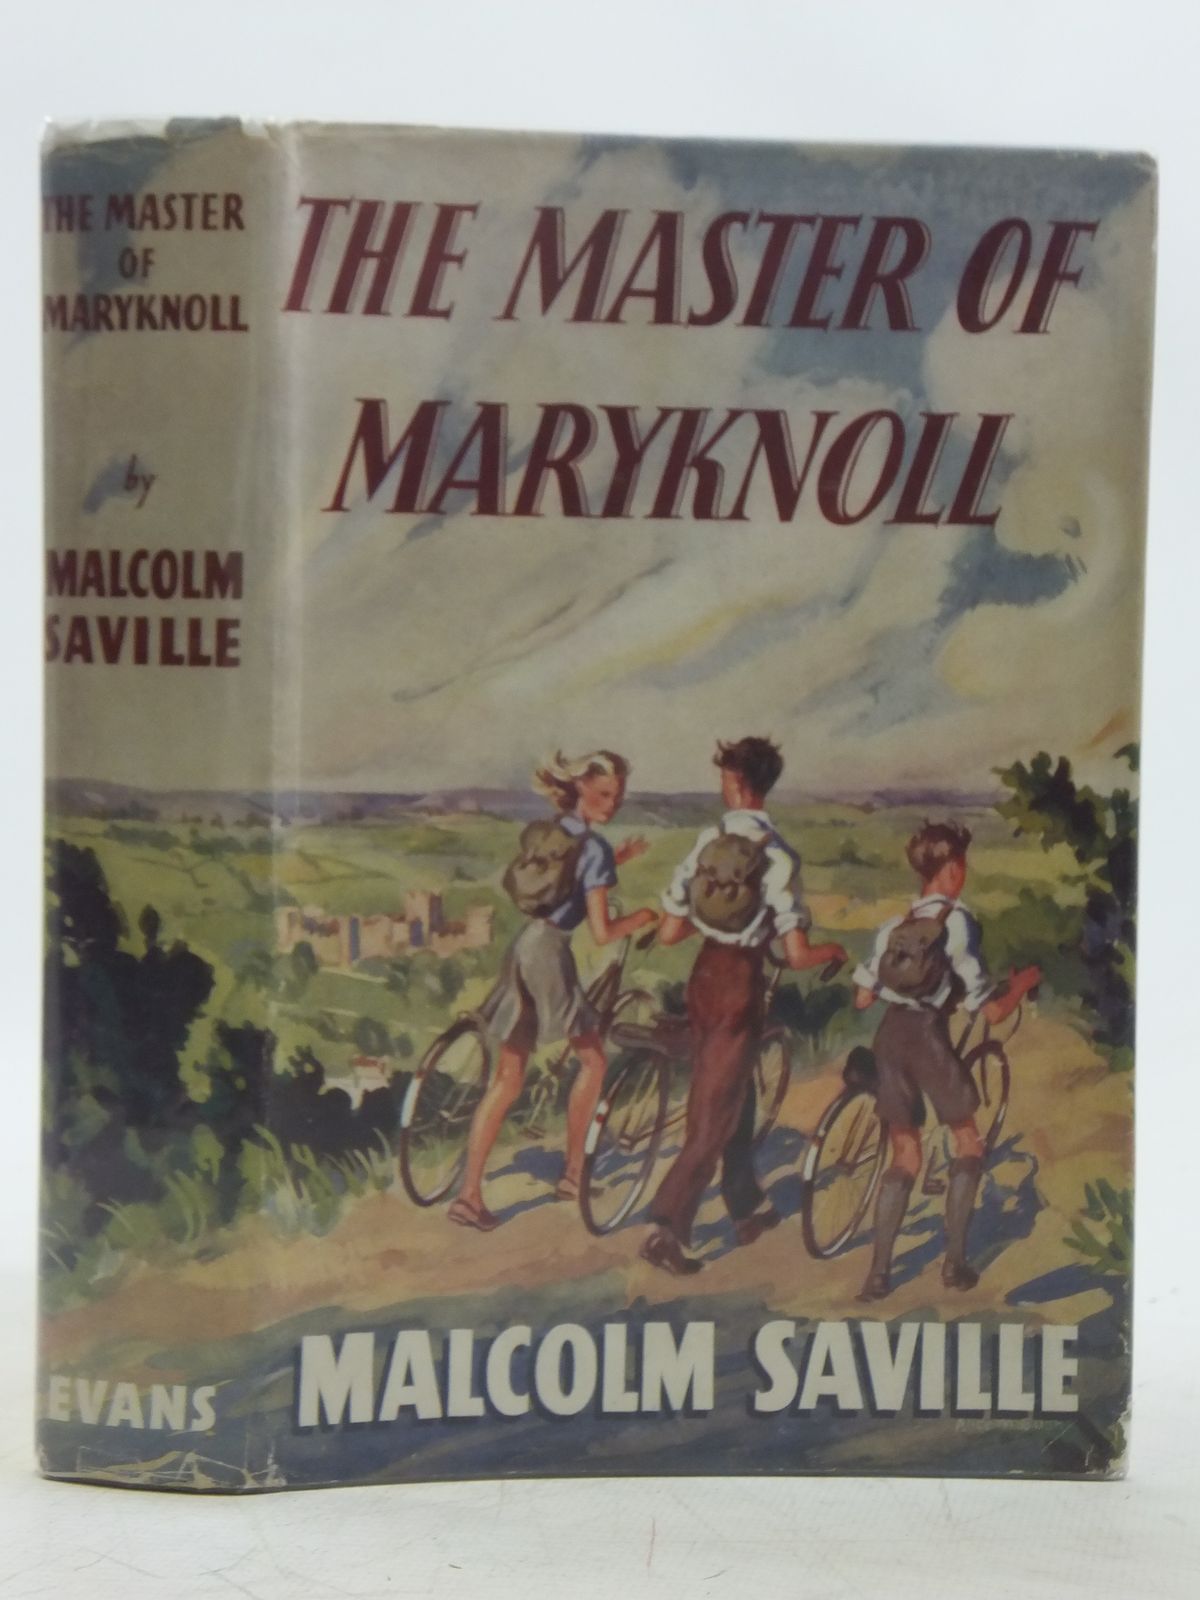 Cover of THE MASTER OF MARYKNOLL by Malcolm Saville